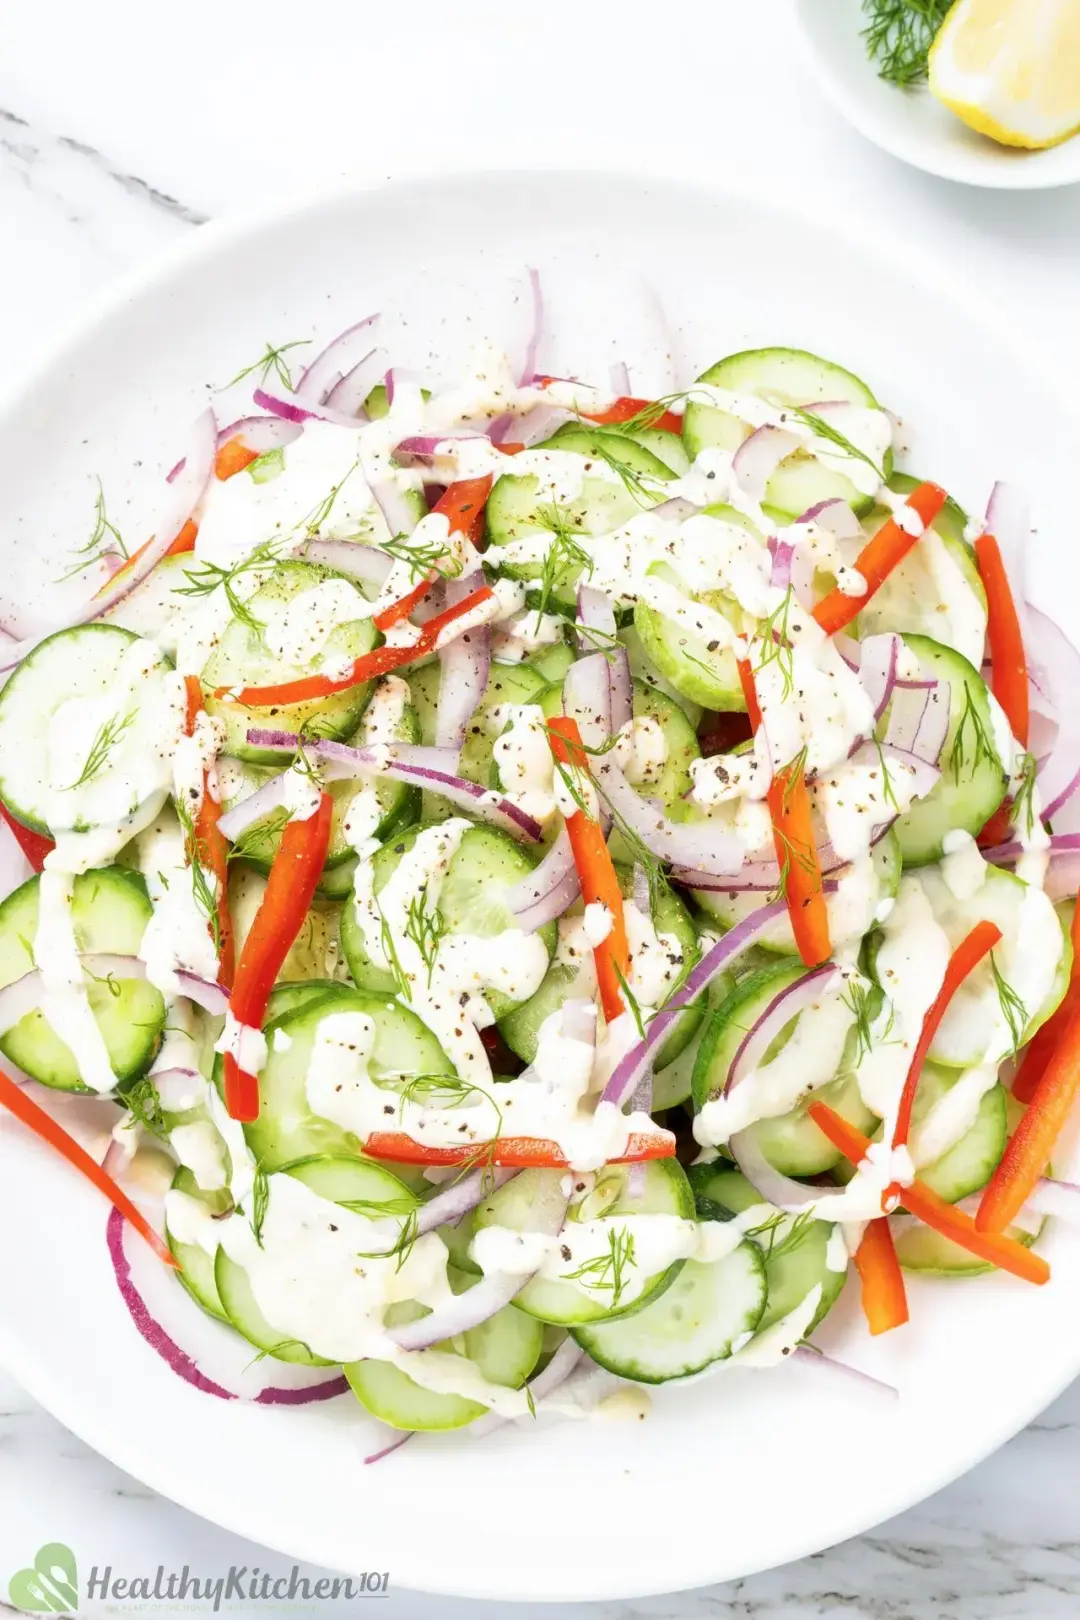 A salad of sliced cucumber, red pepper, dill, red onion, and a white dressing drizzled on top